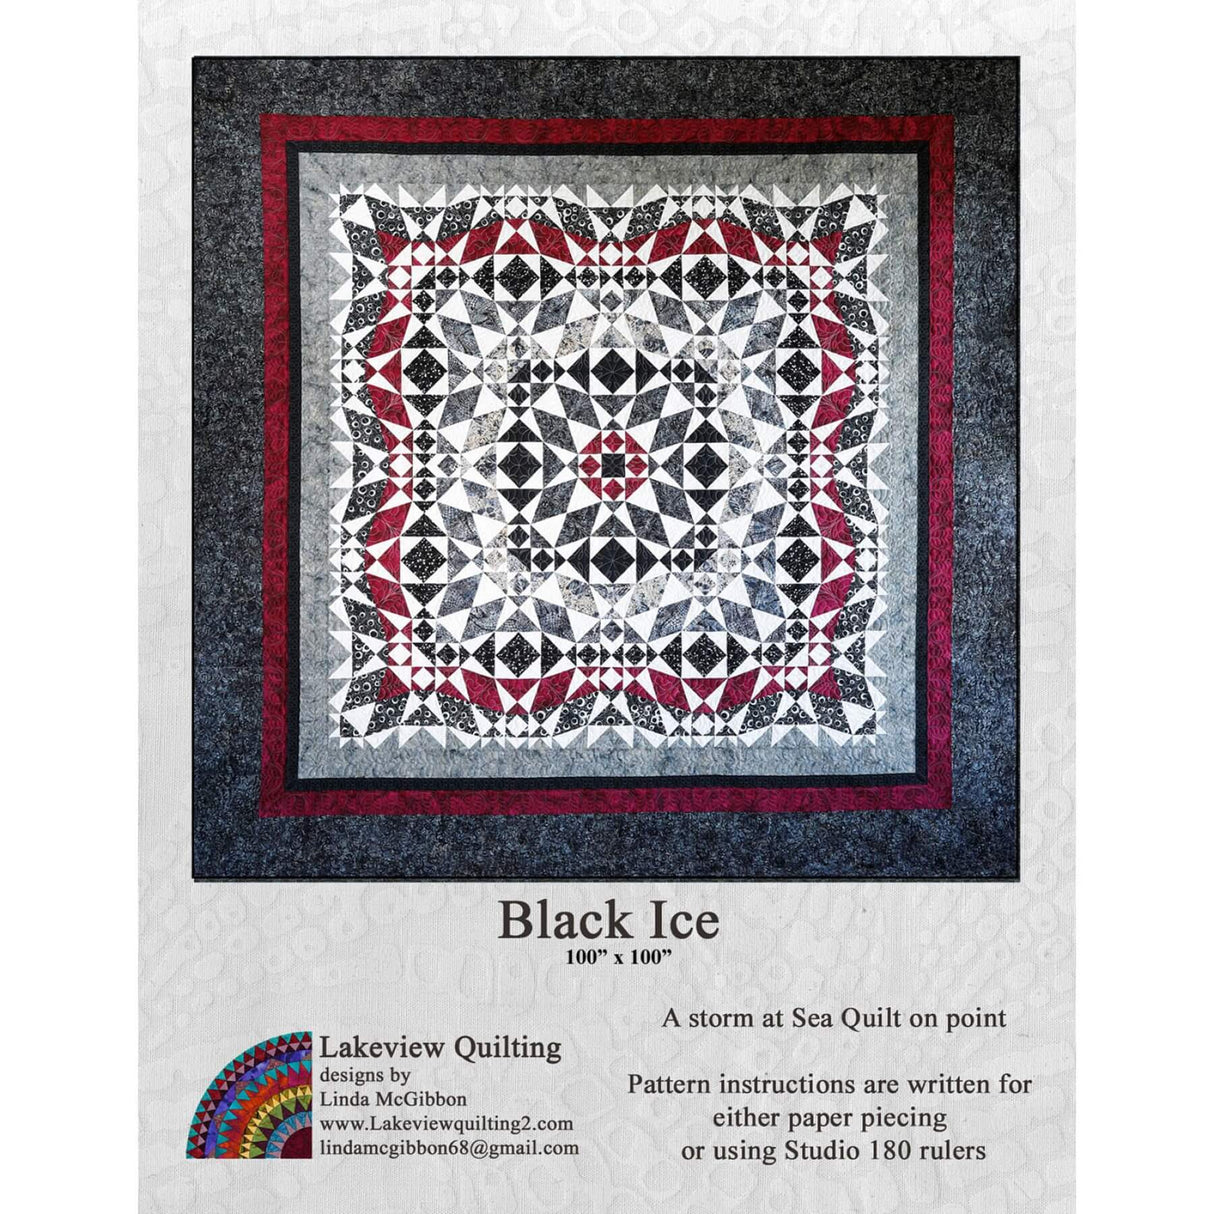 Black Ice quilt pattern shown in red, grey, black and white fabrics